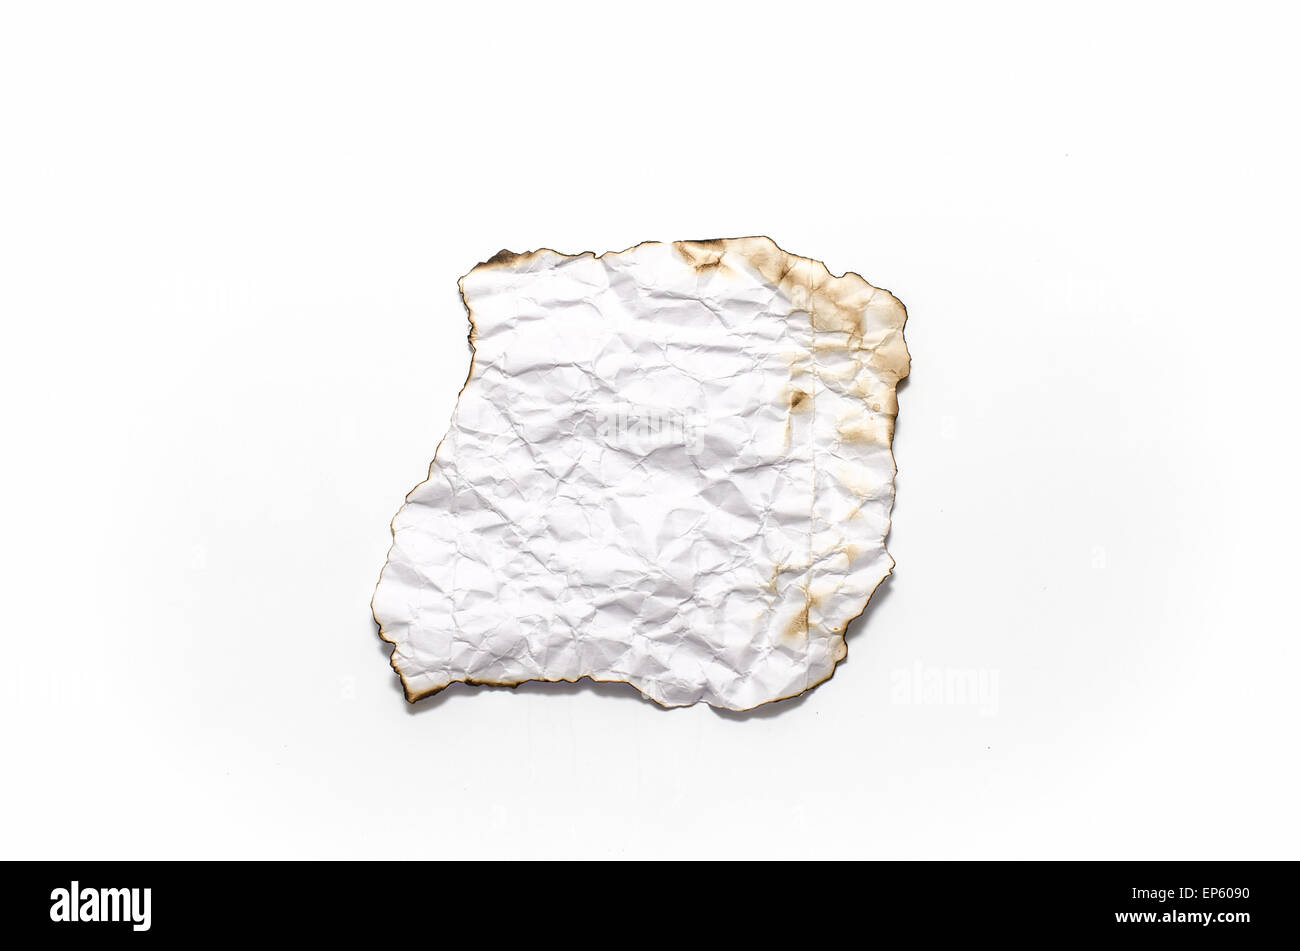 burn of crumpled paper on a white background Stock Photo